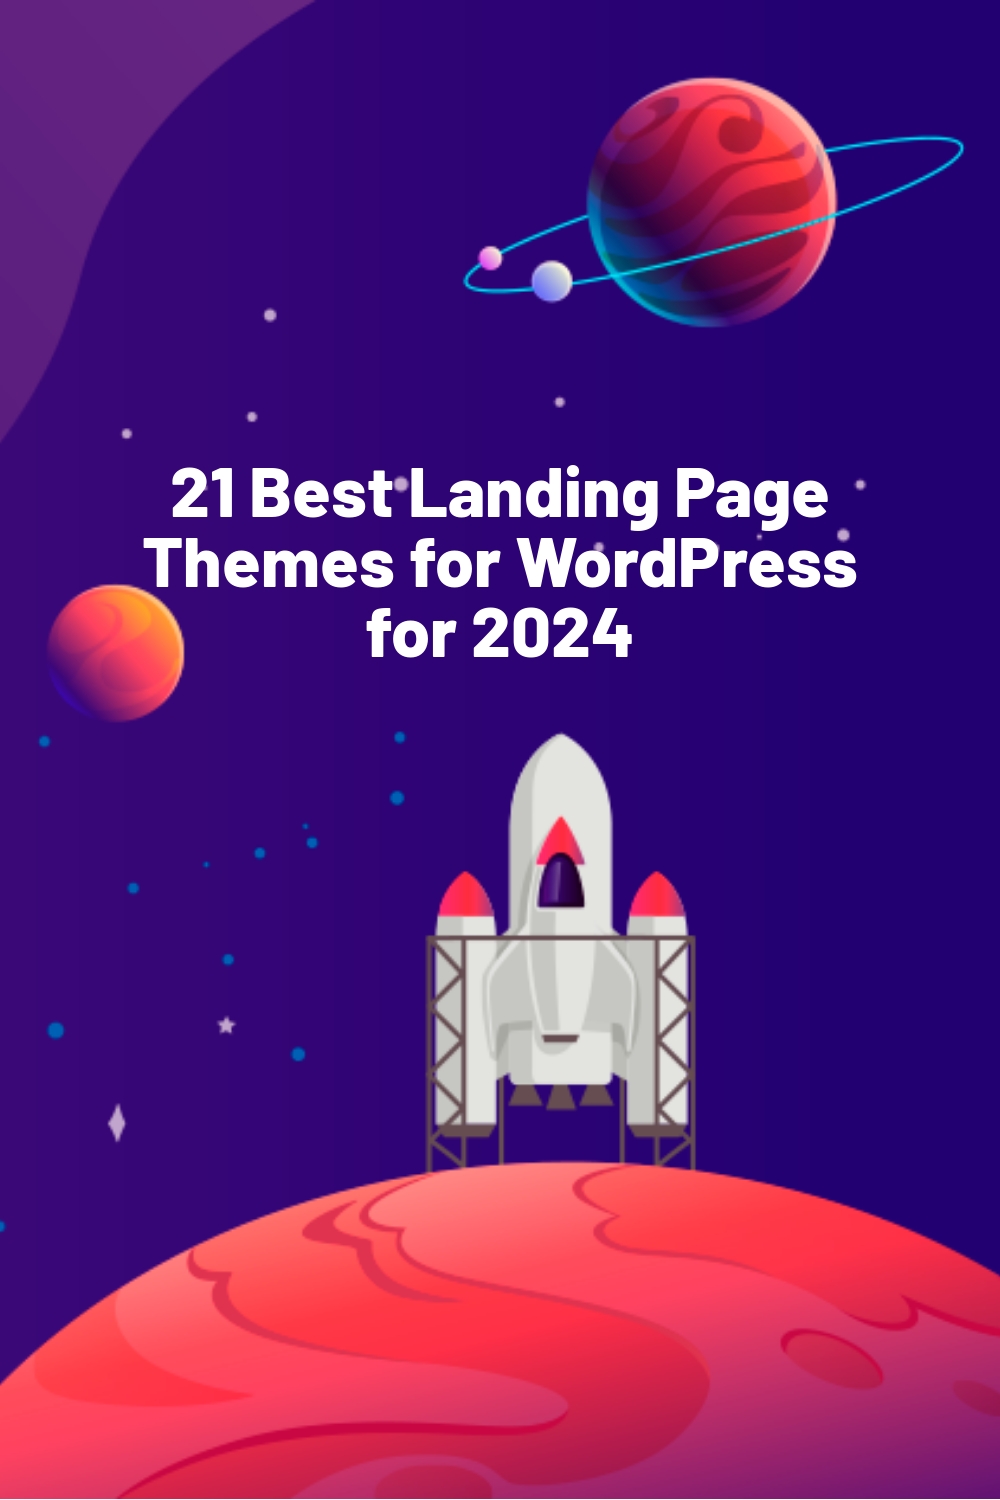 21 Best Landing Page Themes for WordPress for 2024